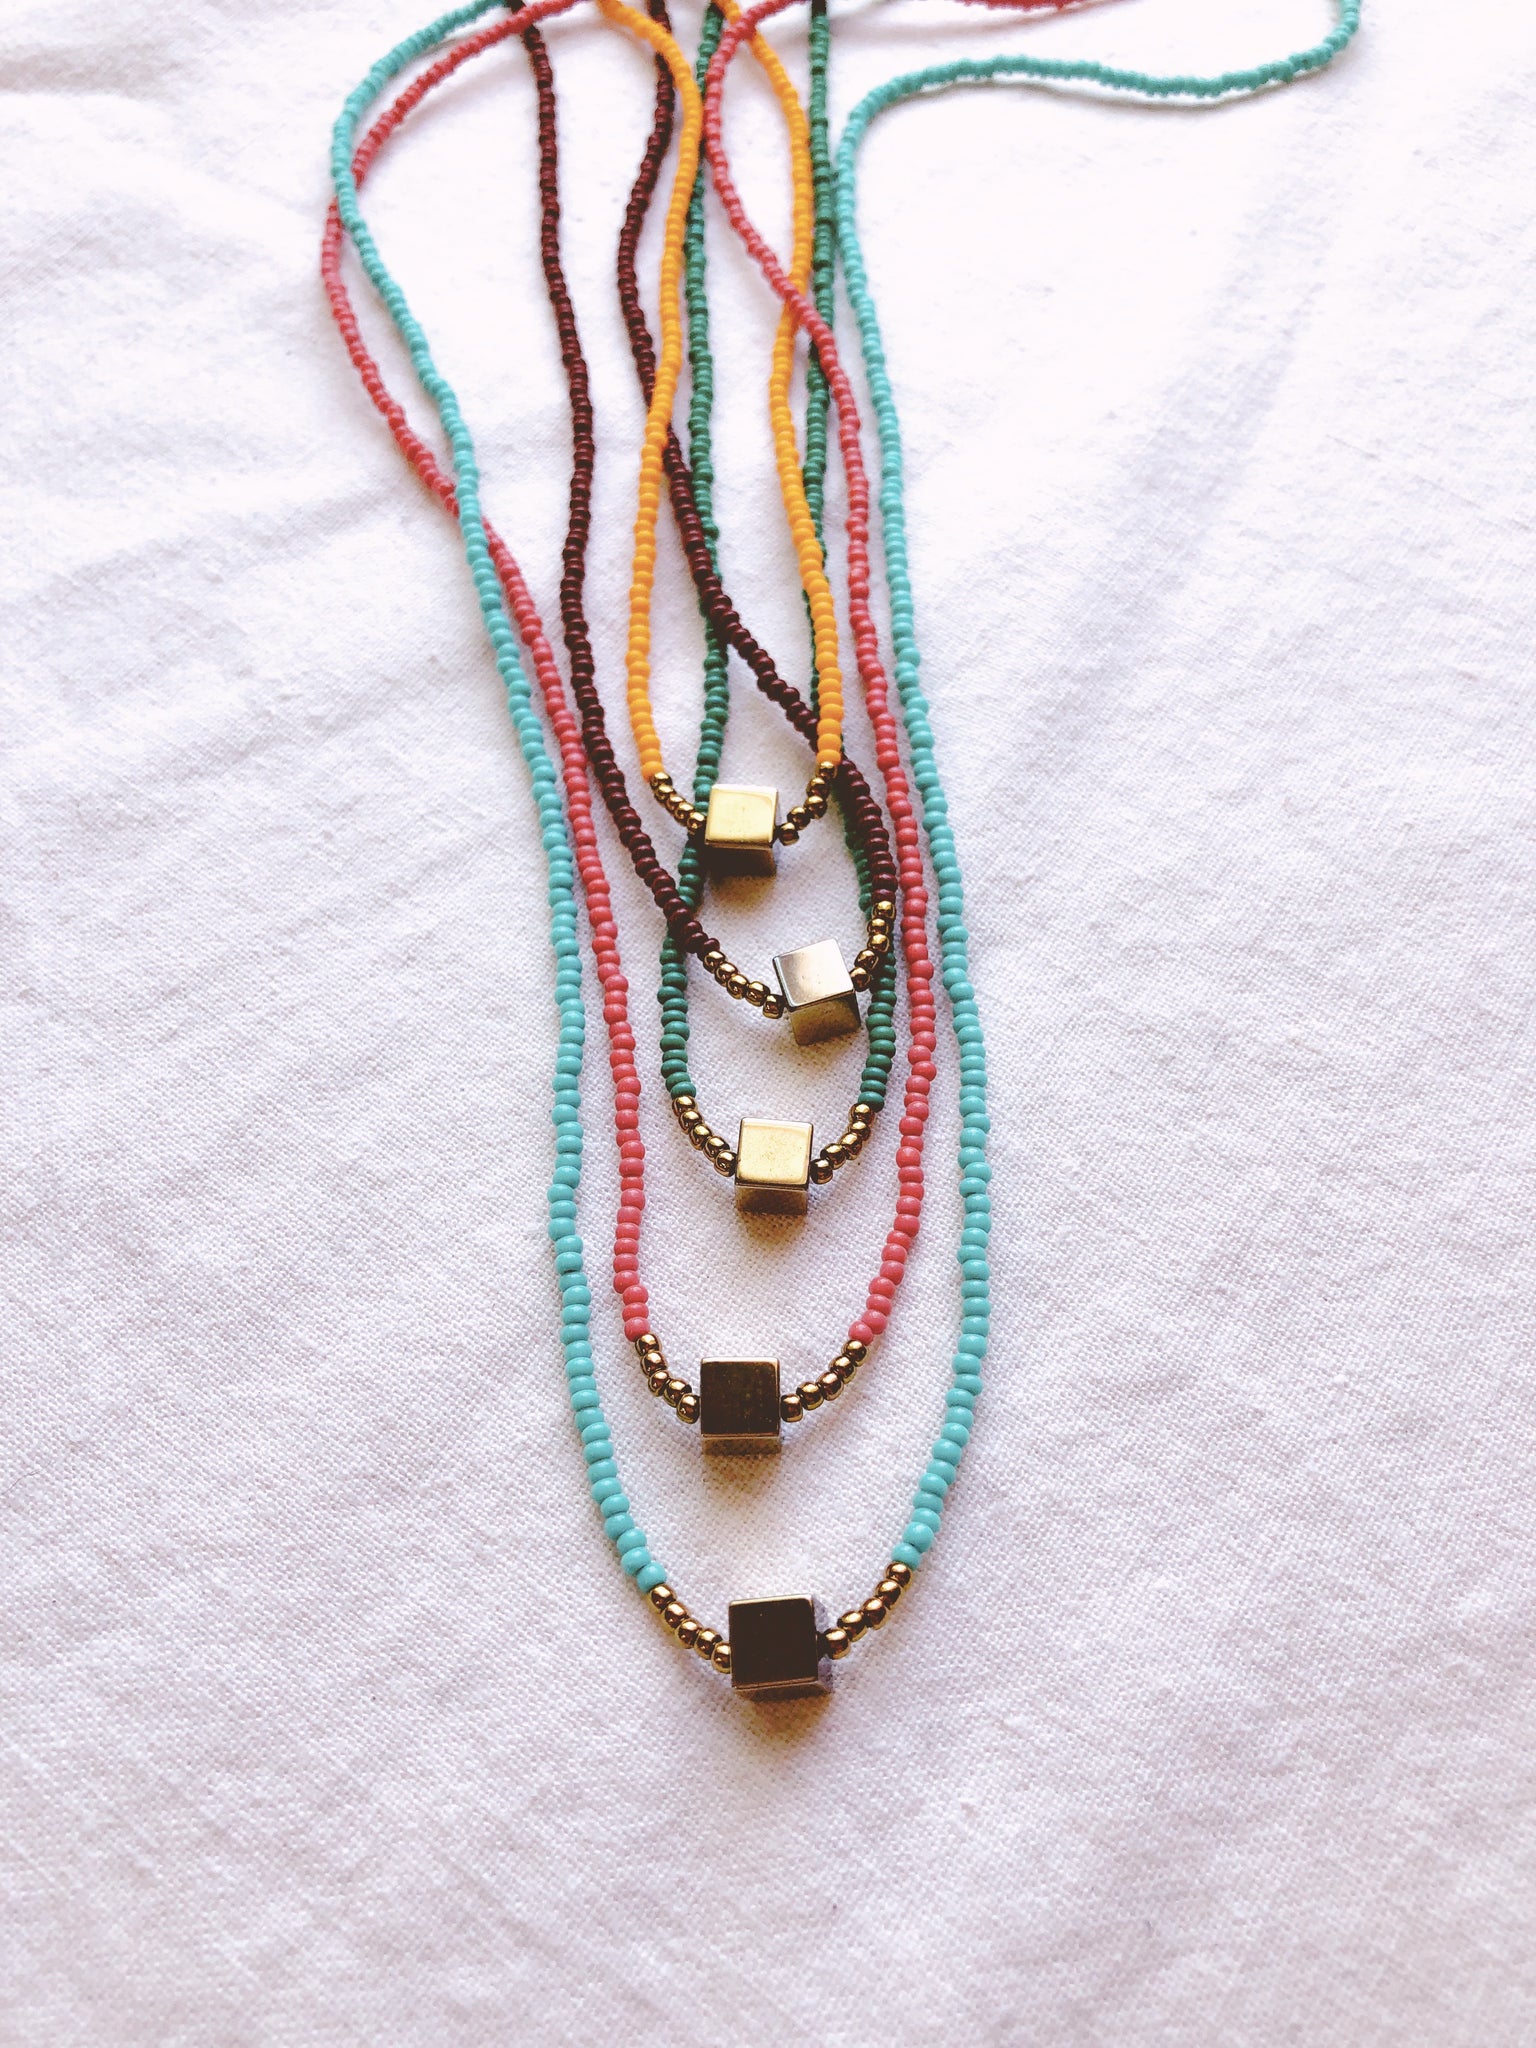 Festival Parade + Minimalist Pyrite and Vintage glass beaded necklaces